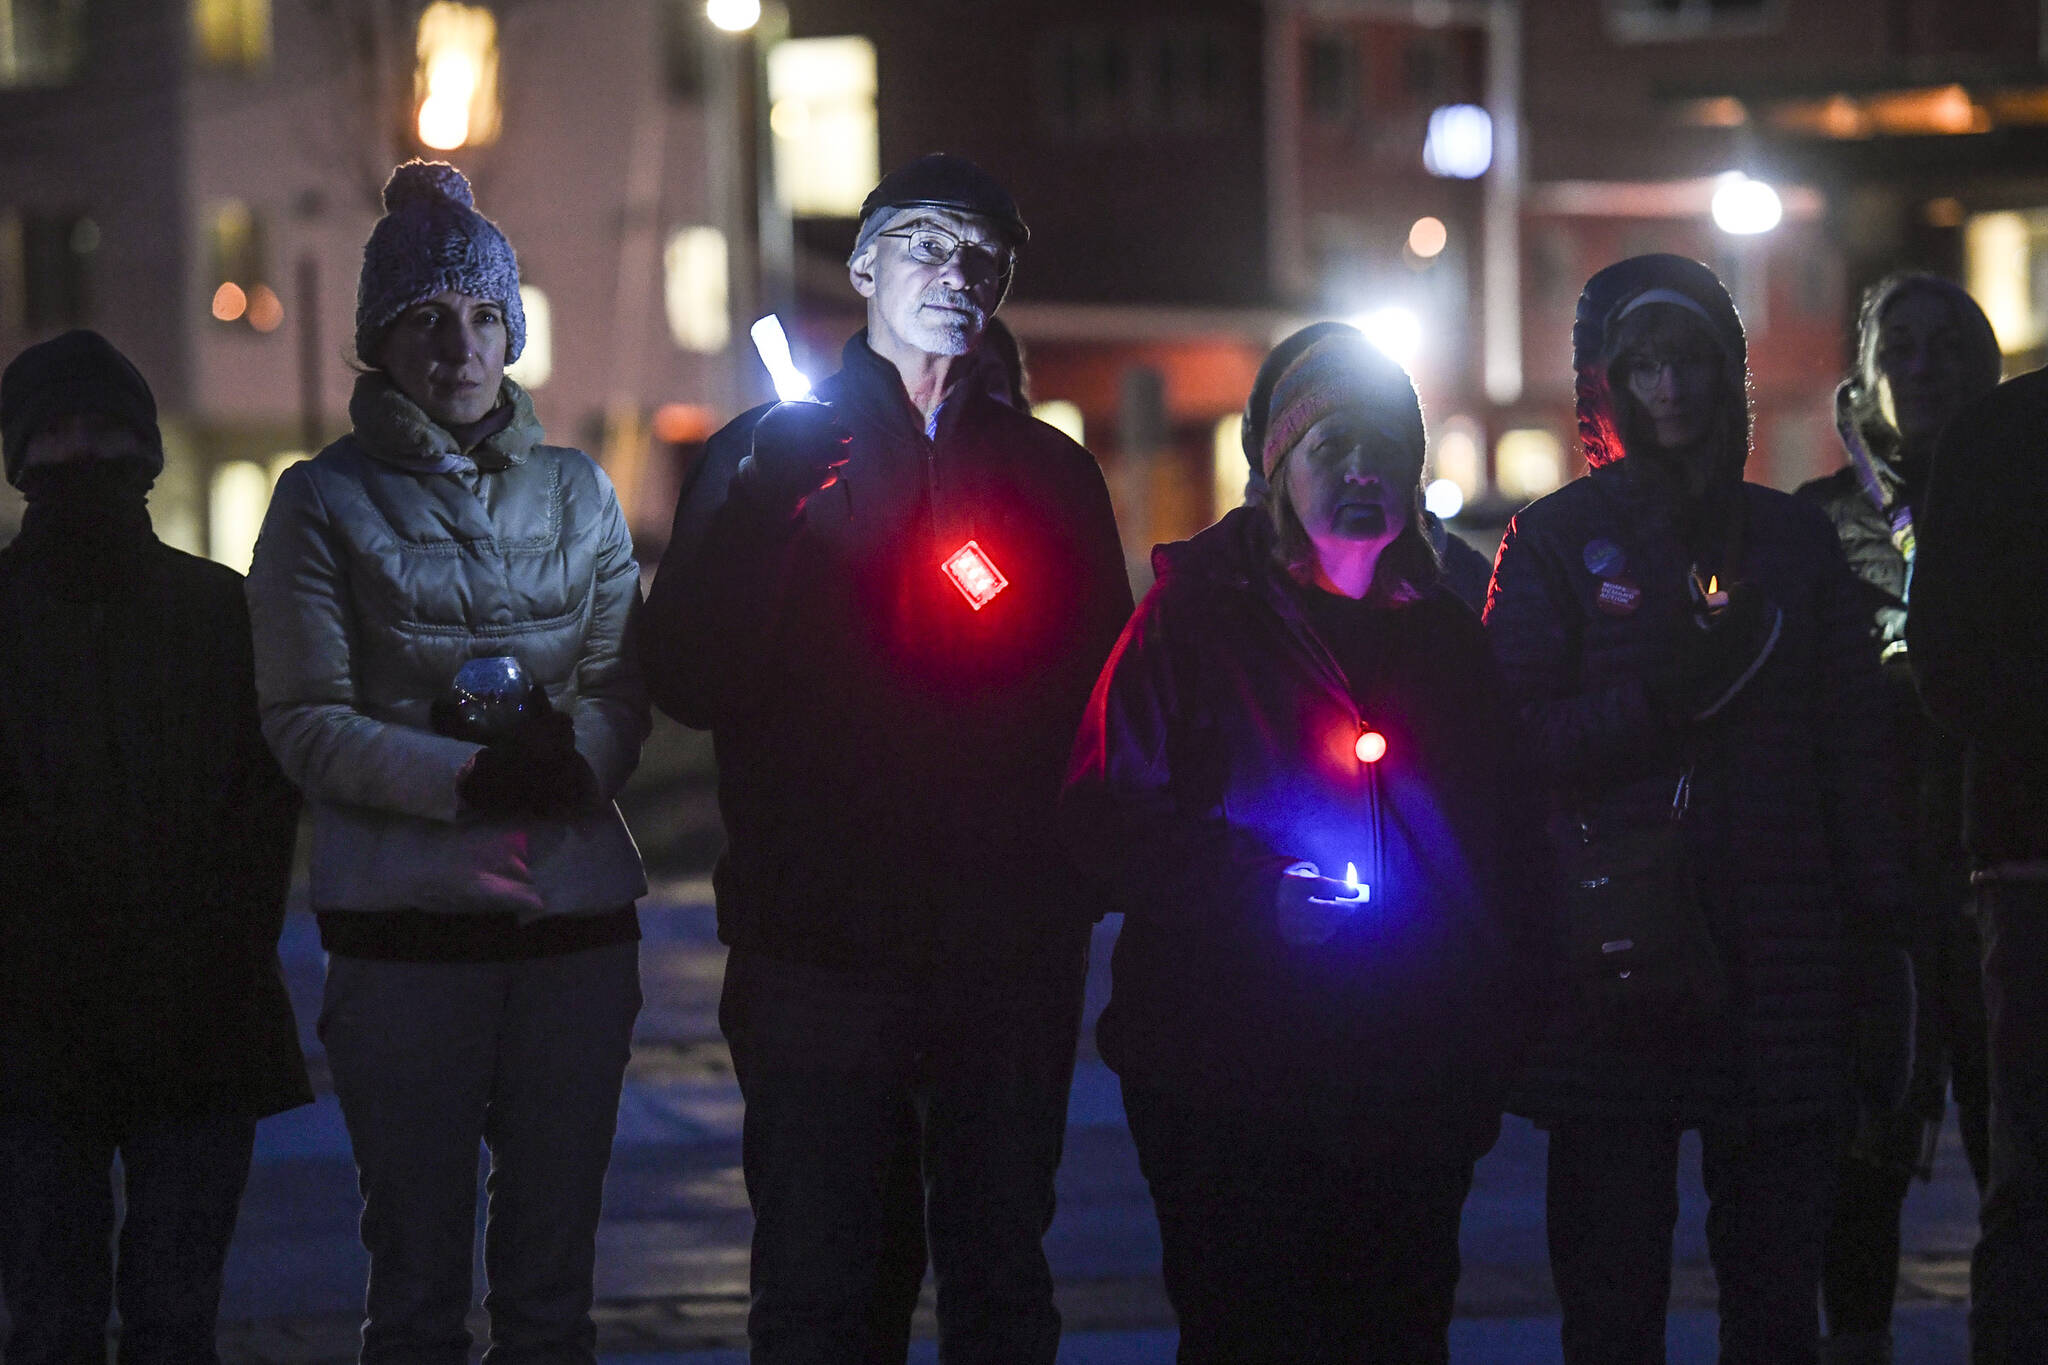 Michael Penn/ Juneau Empire File
Juneau residents attend a vigil to end gun violence sponsored by Moms Demand Action at the Mayor Bill Overstreet Park on Saturday, Dec. 14, 2019. Tuesday, members of Moms Demand Action held a vigil on Zoom.